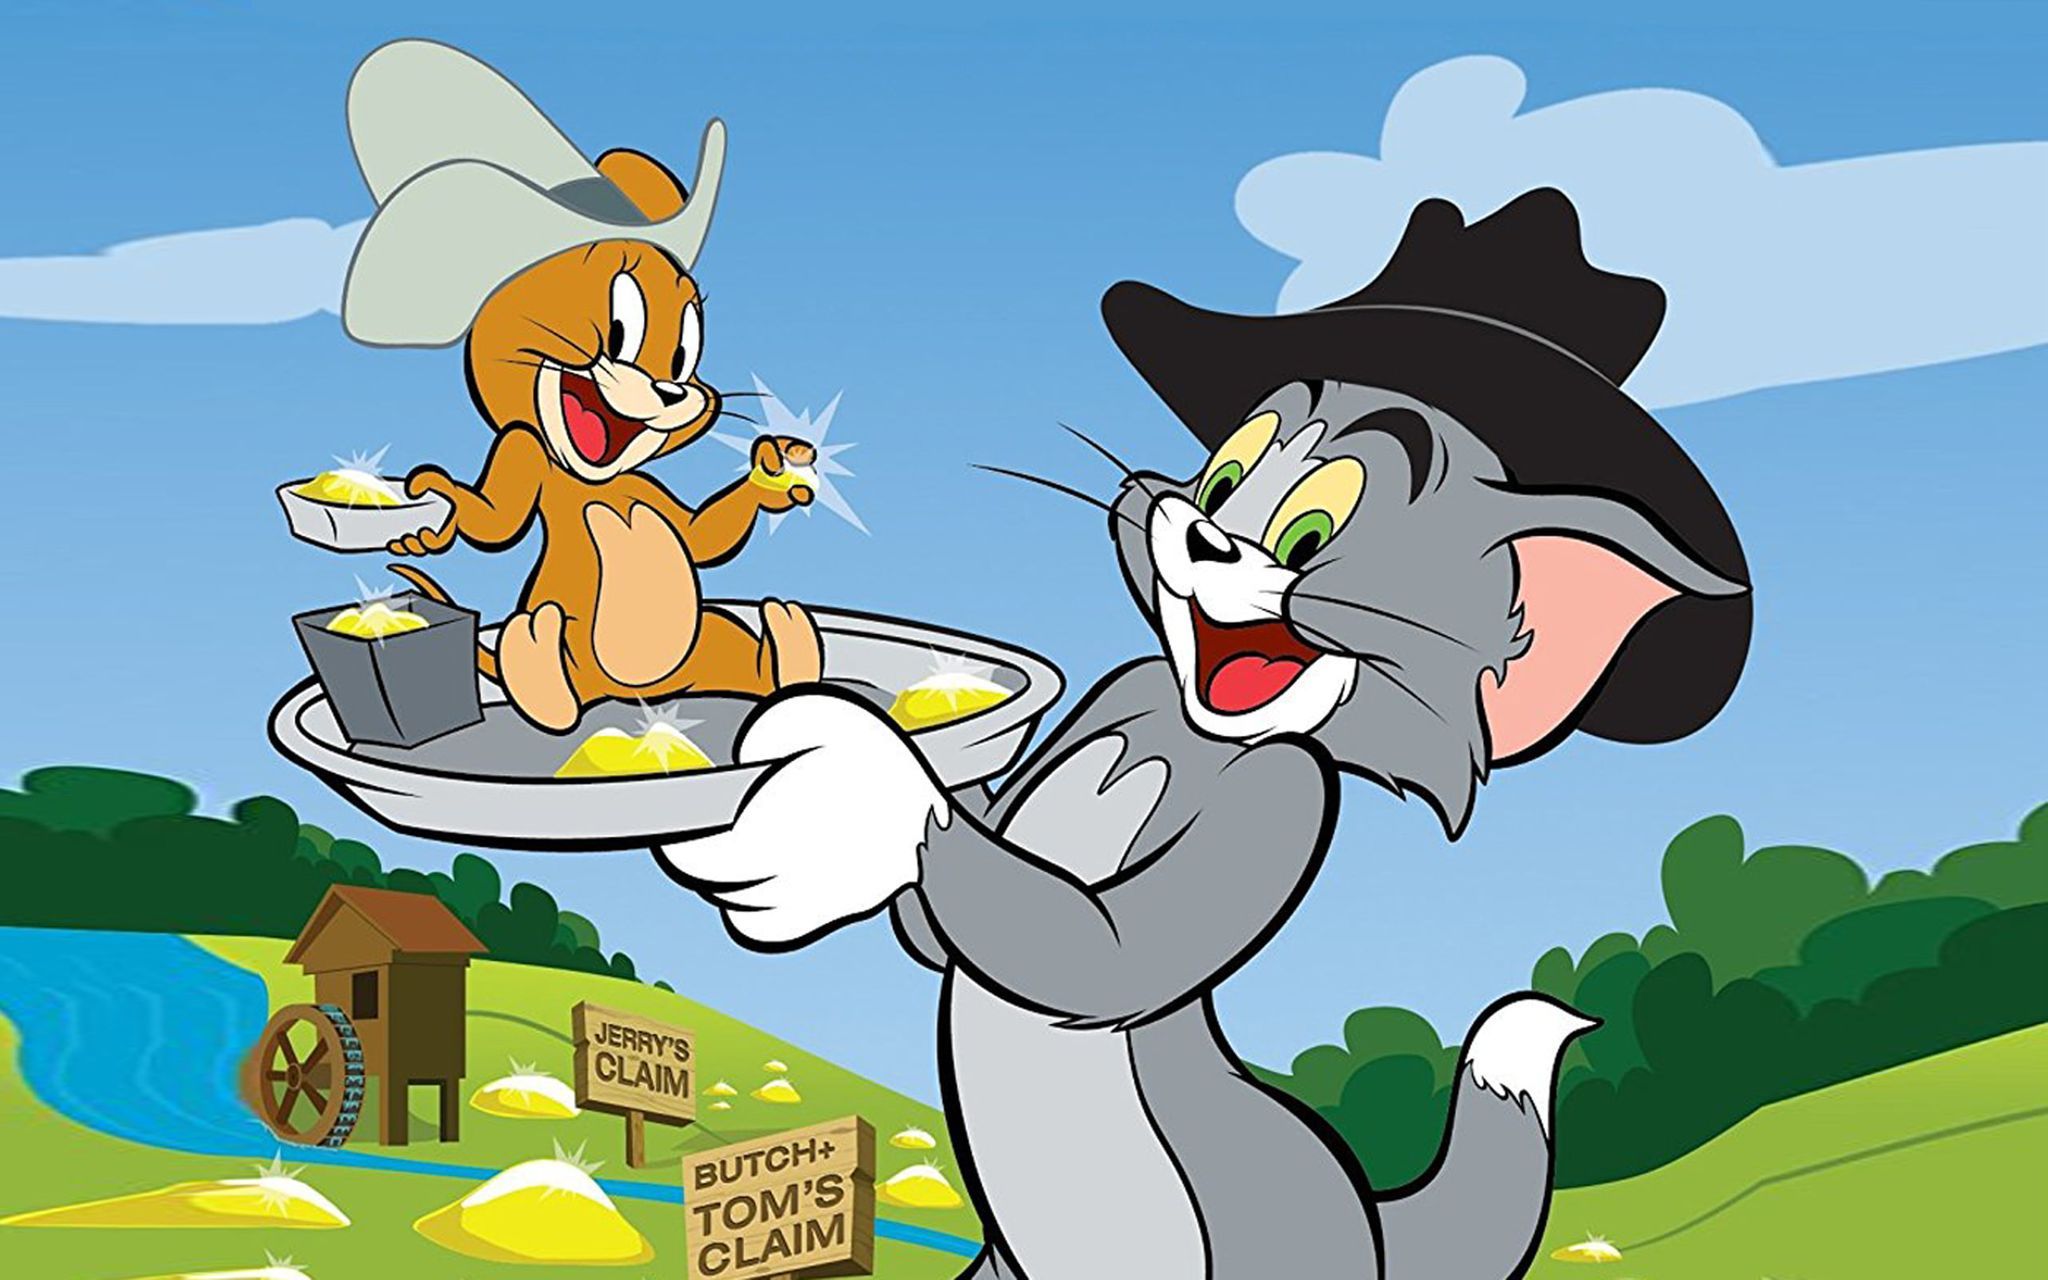 Tom And Jerry Go Back In Time Hd Wallpaper 1920×1200 Wallpaper D8b6ec0affcca7e92e40f9d272f92be0